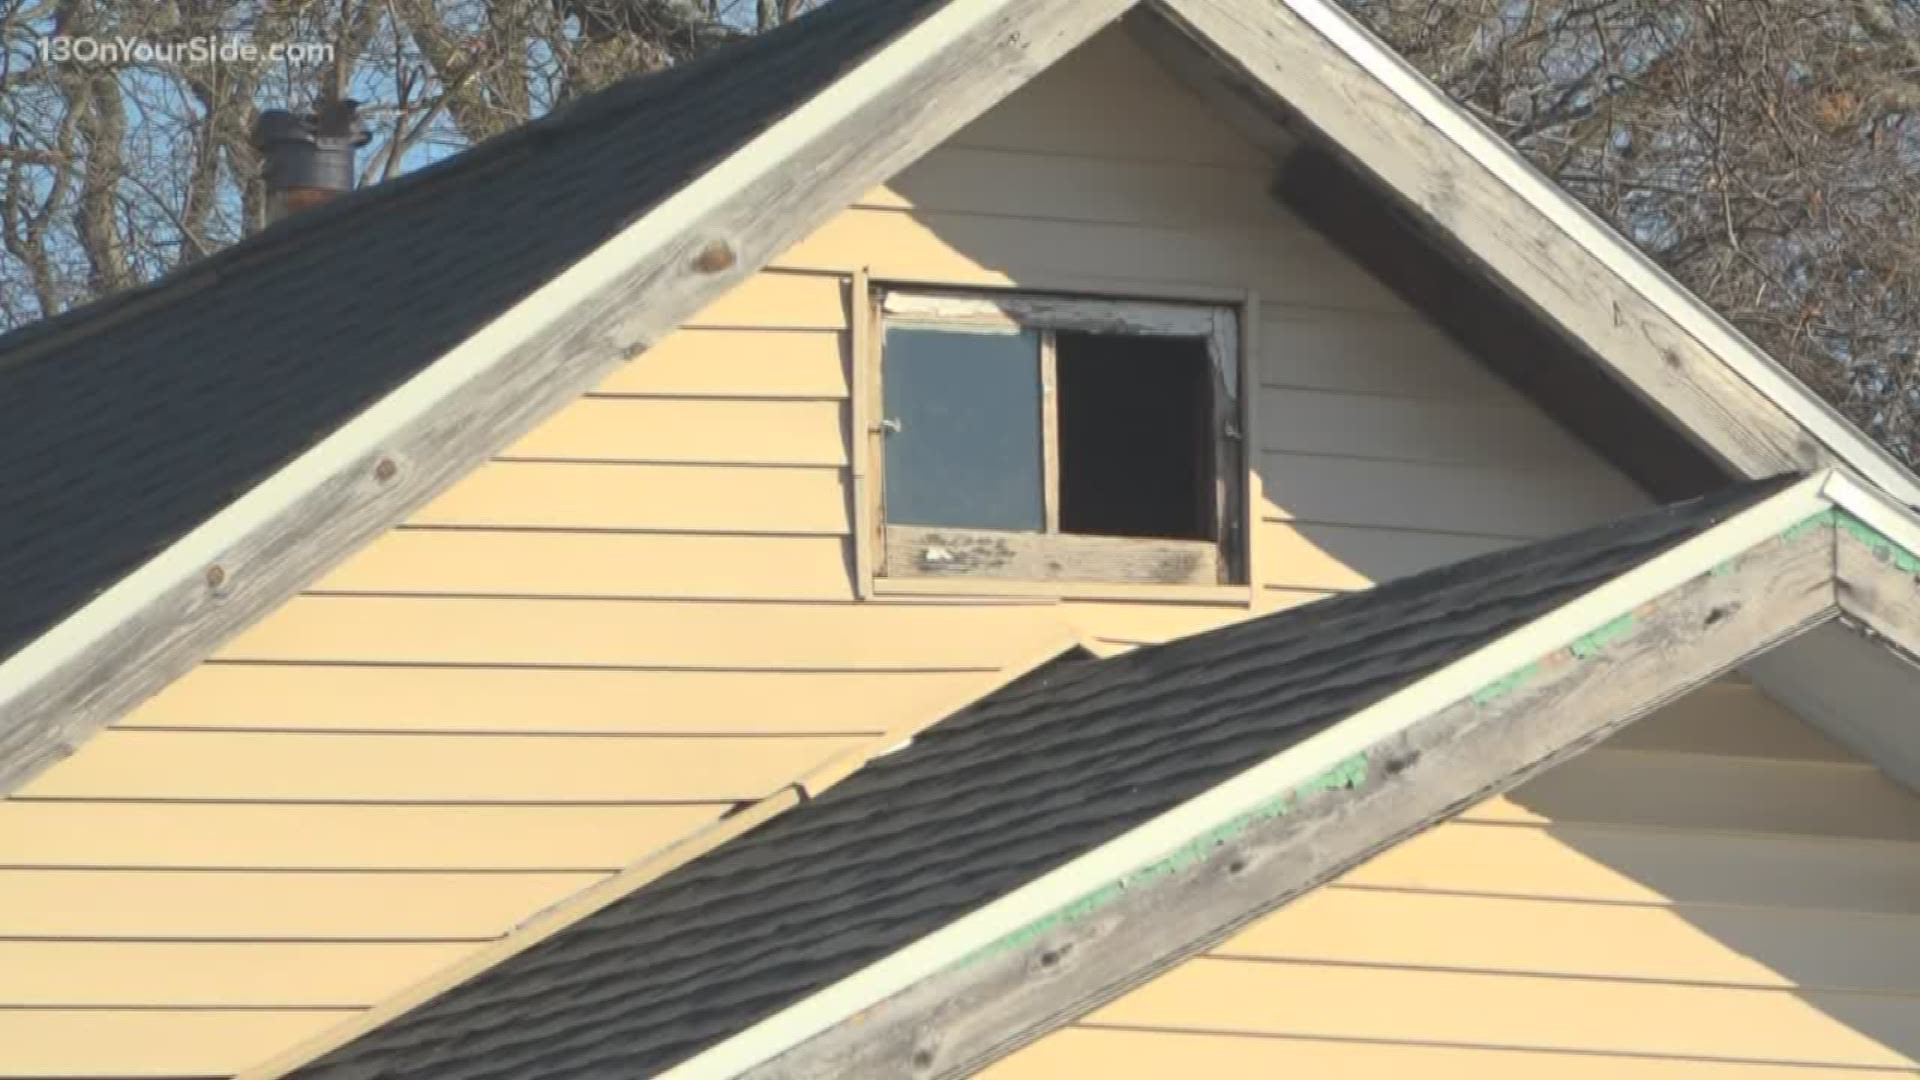 The fire department said a juvenile has been identified as the suspect in the fire.